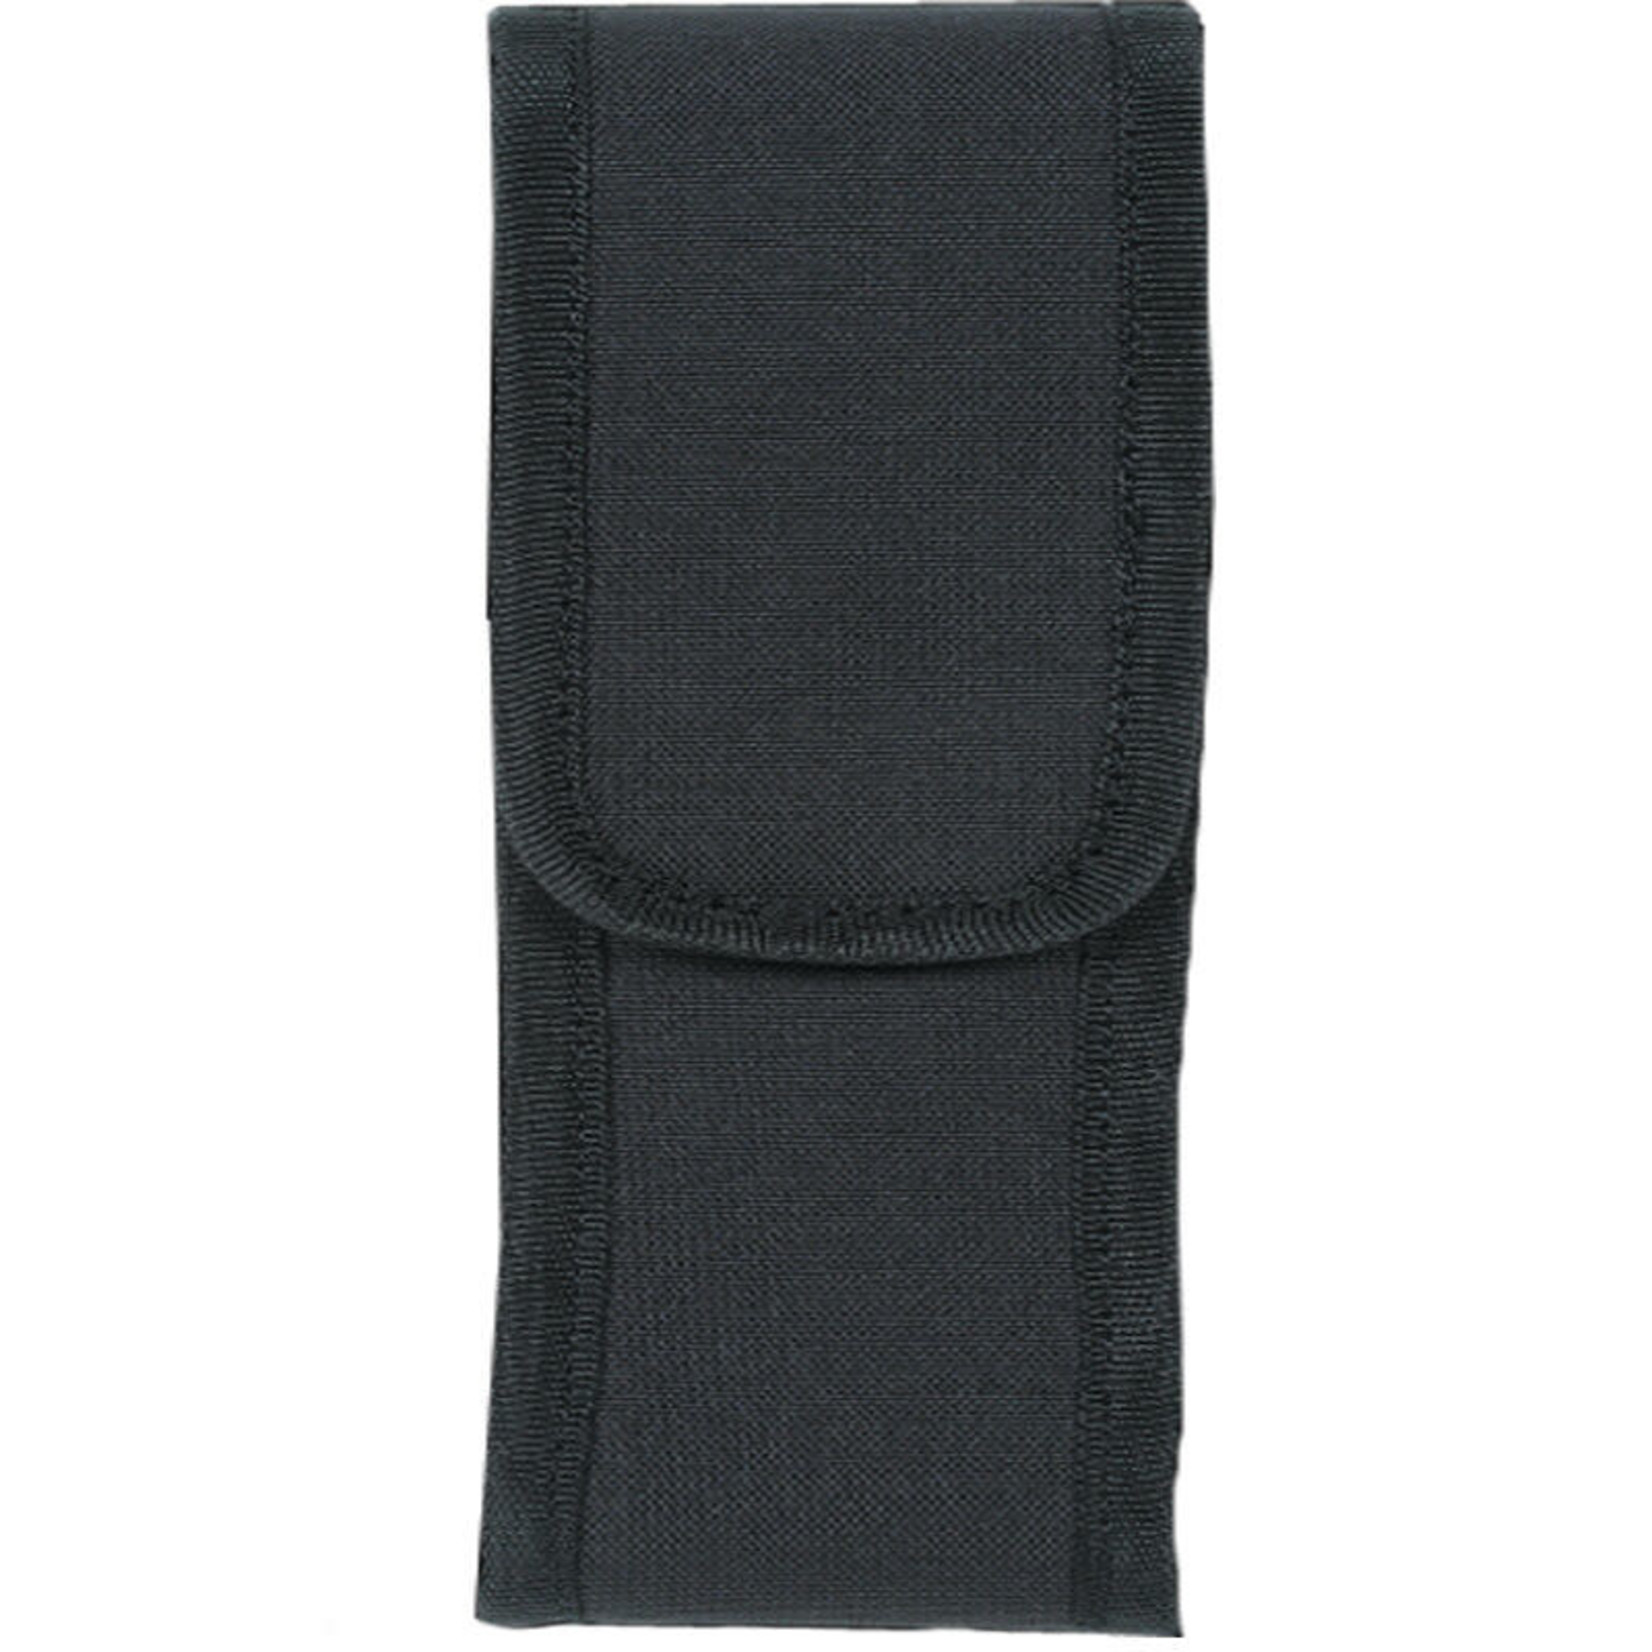 VOODOO TACTICAL FLASHLIGHT POUCH SMALL BLACK